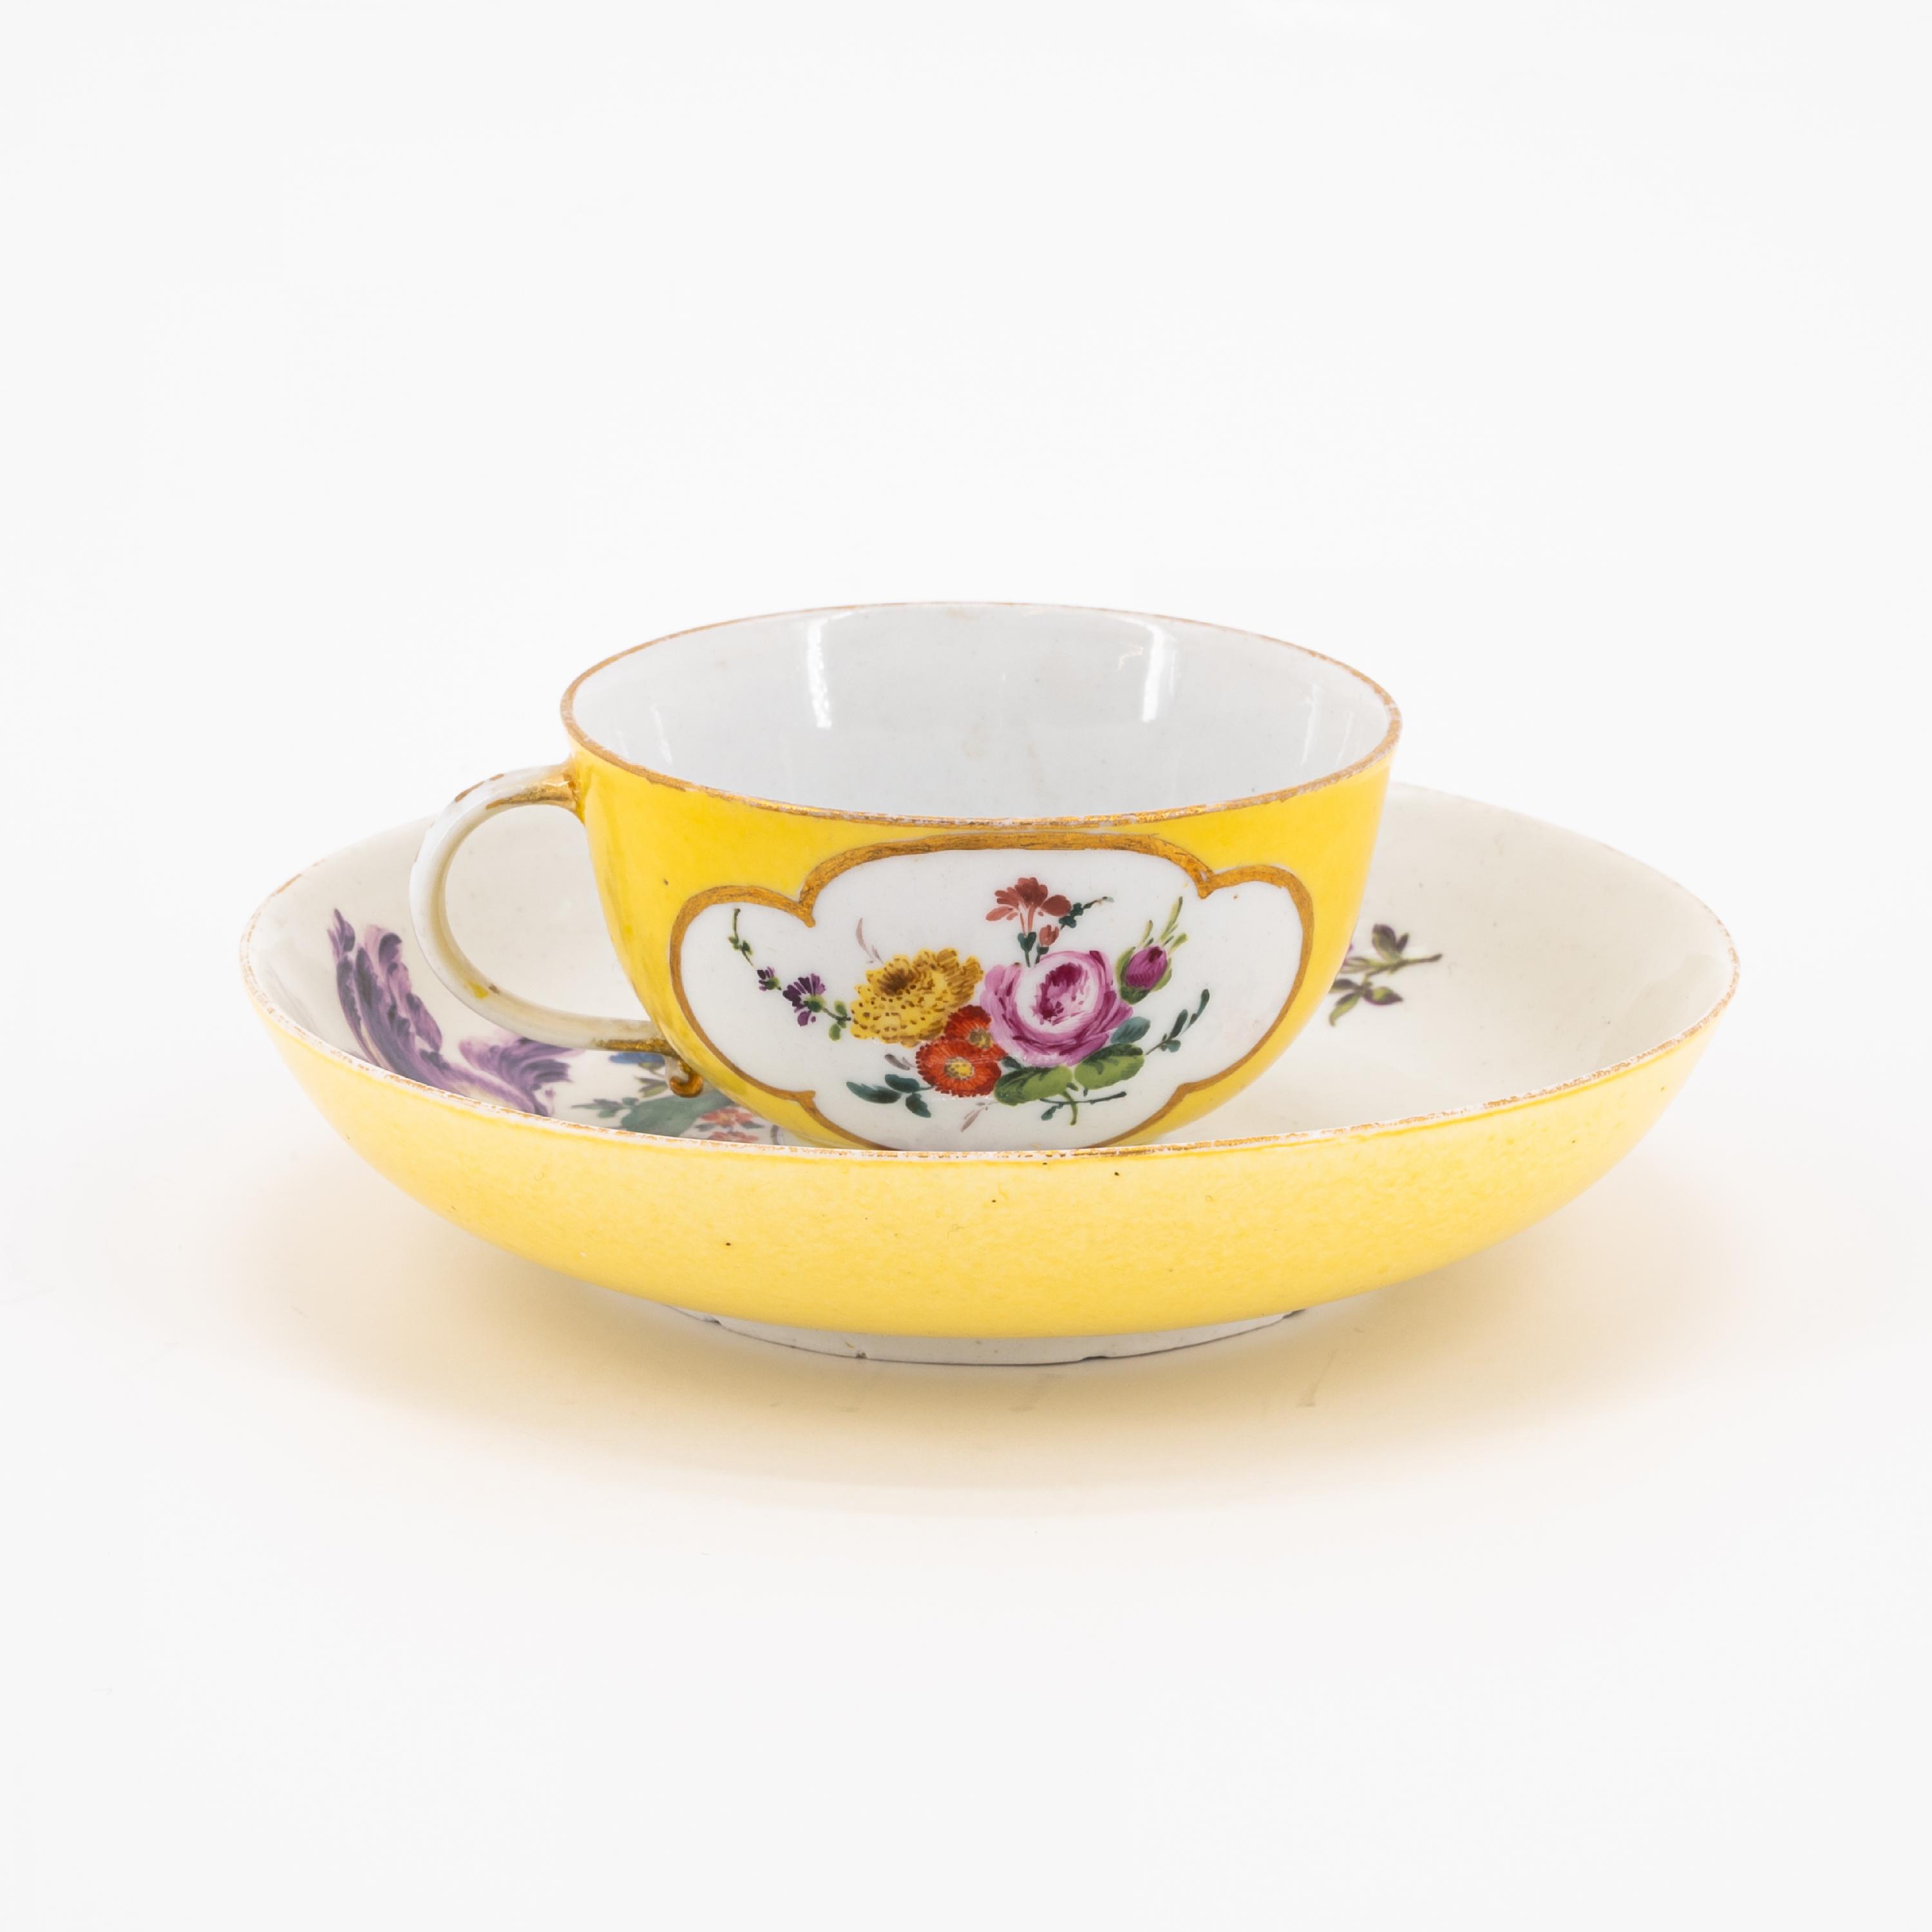 TWO PORCELAIN CUPS AND SAUCERS WITH YELLOW AND ORANGE COLOURED GROUND AS WELL AS FLORAL DECOR - Image 3 of 11